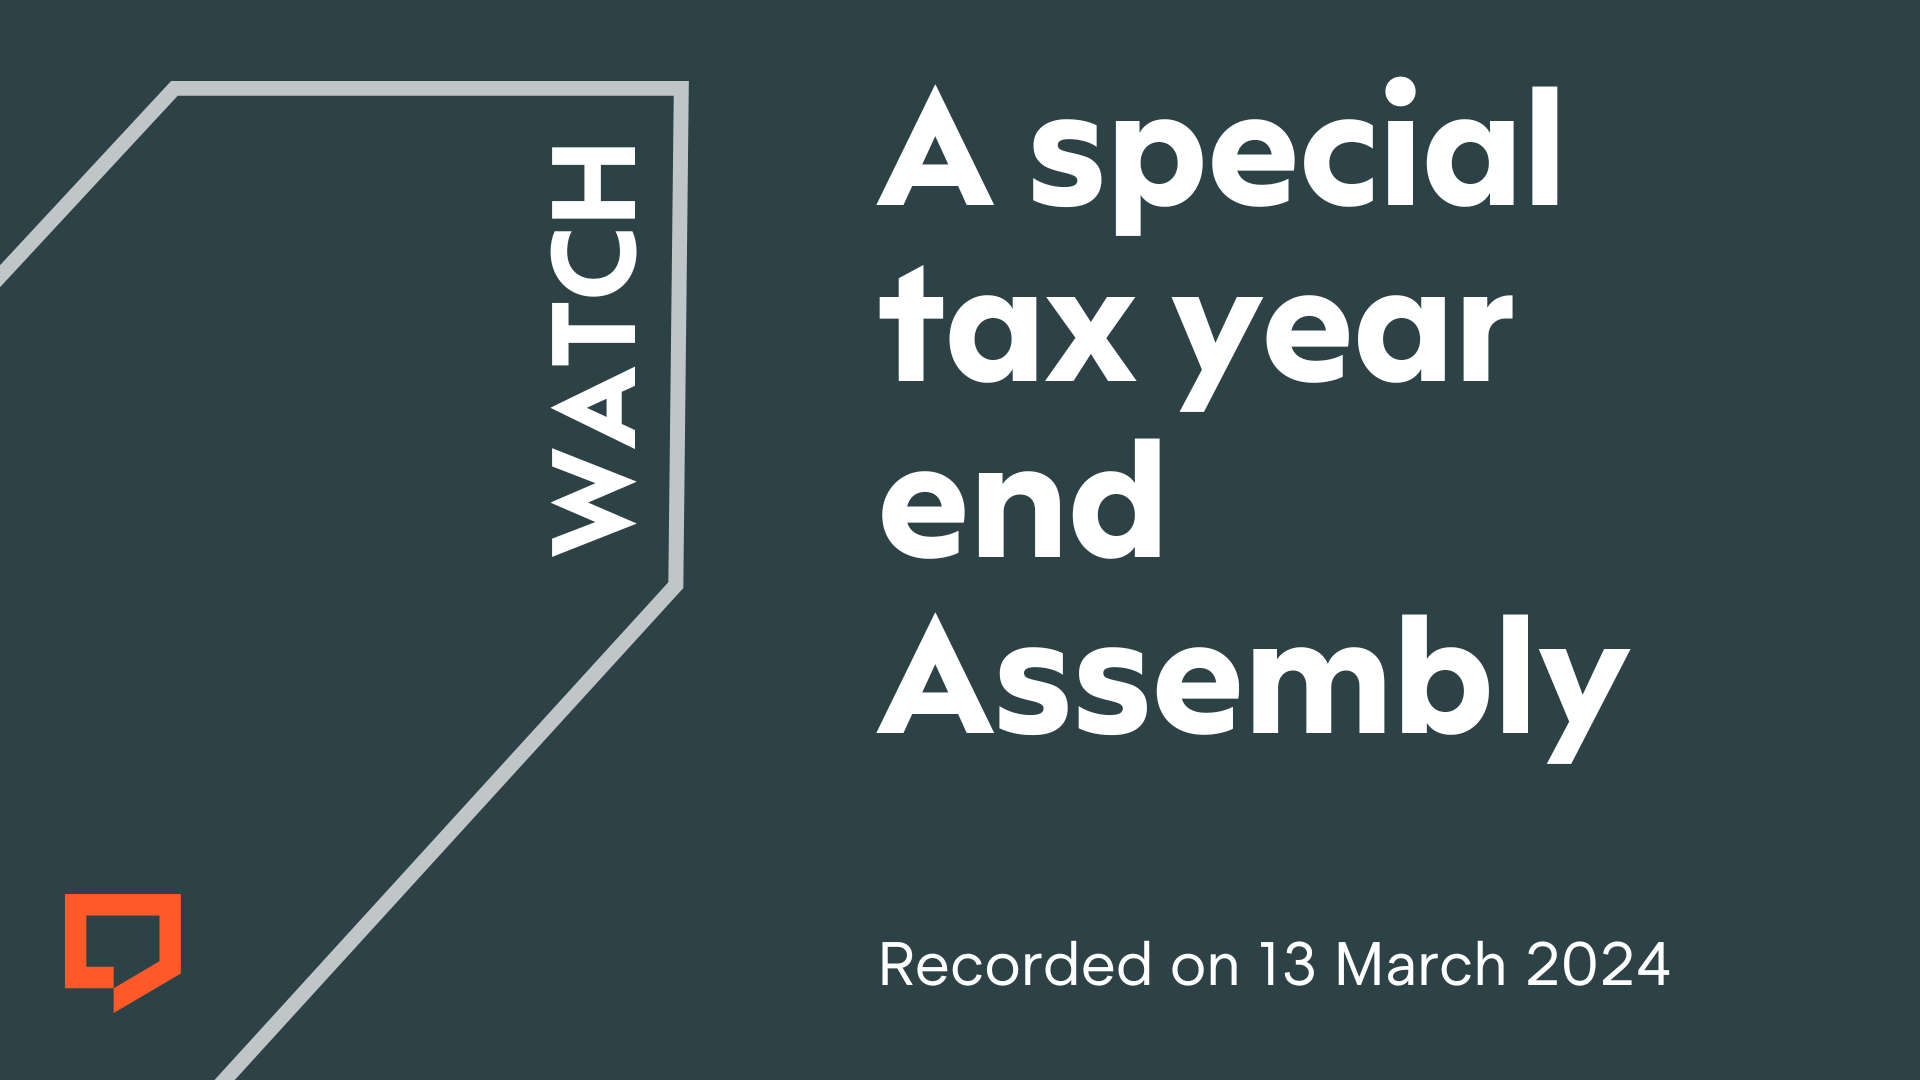 Watch a special tax year end Assembly. Recorded on 13 March 2024.